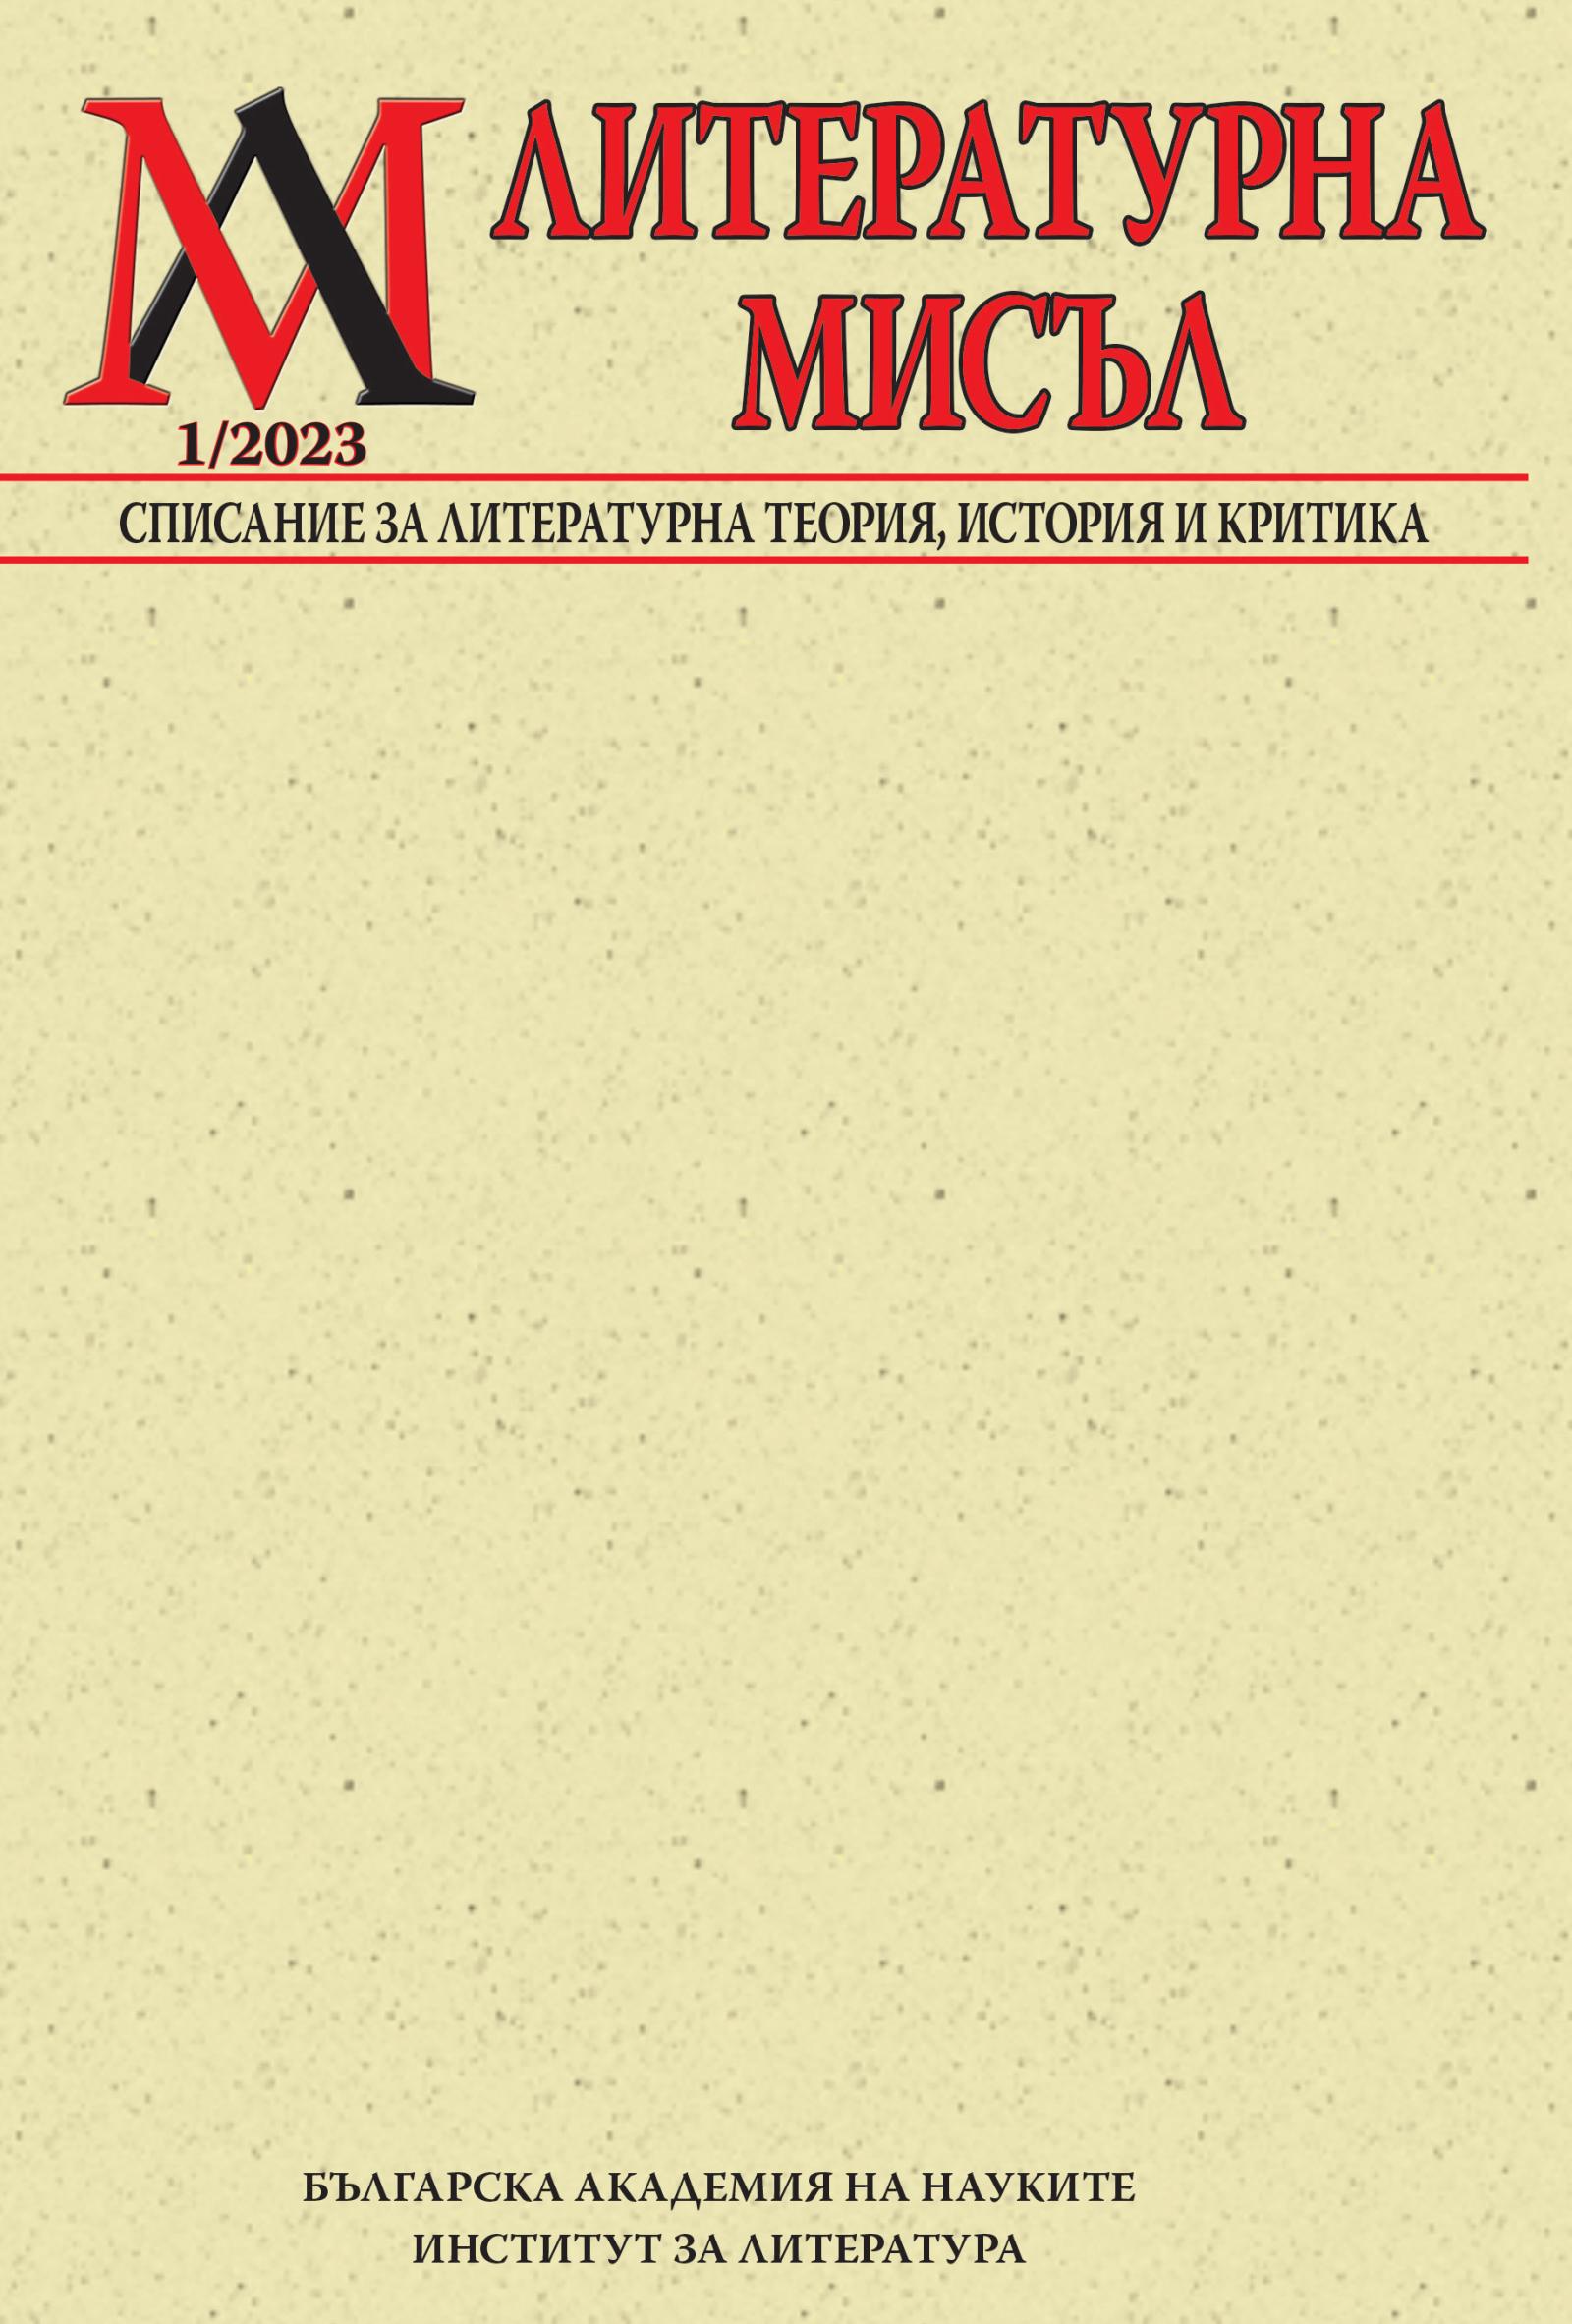 Cover_LM_1_2023Front.jpg